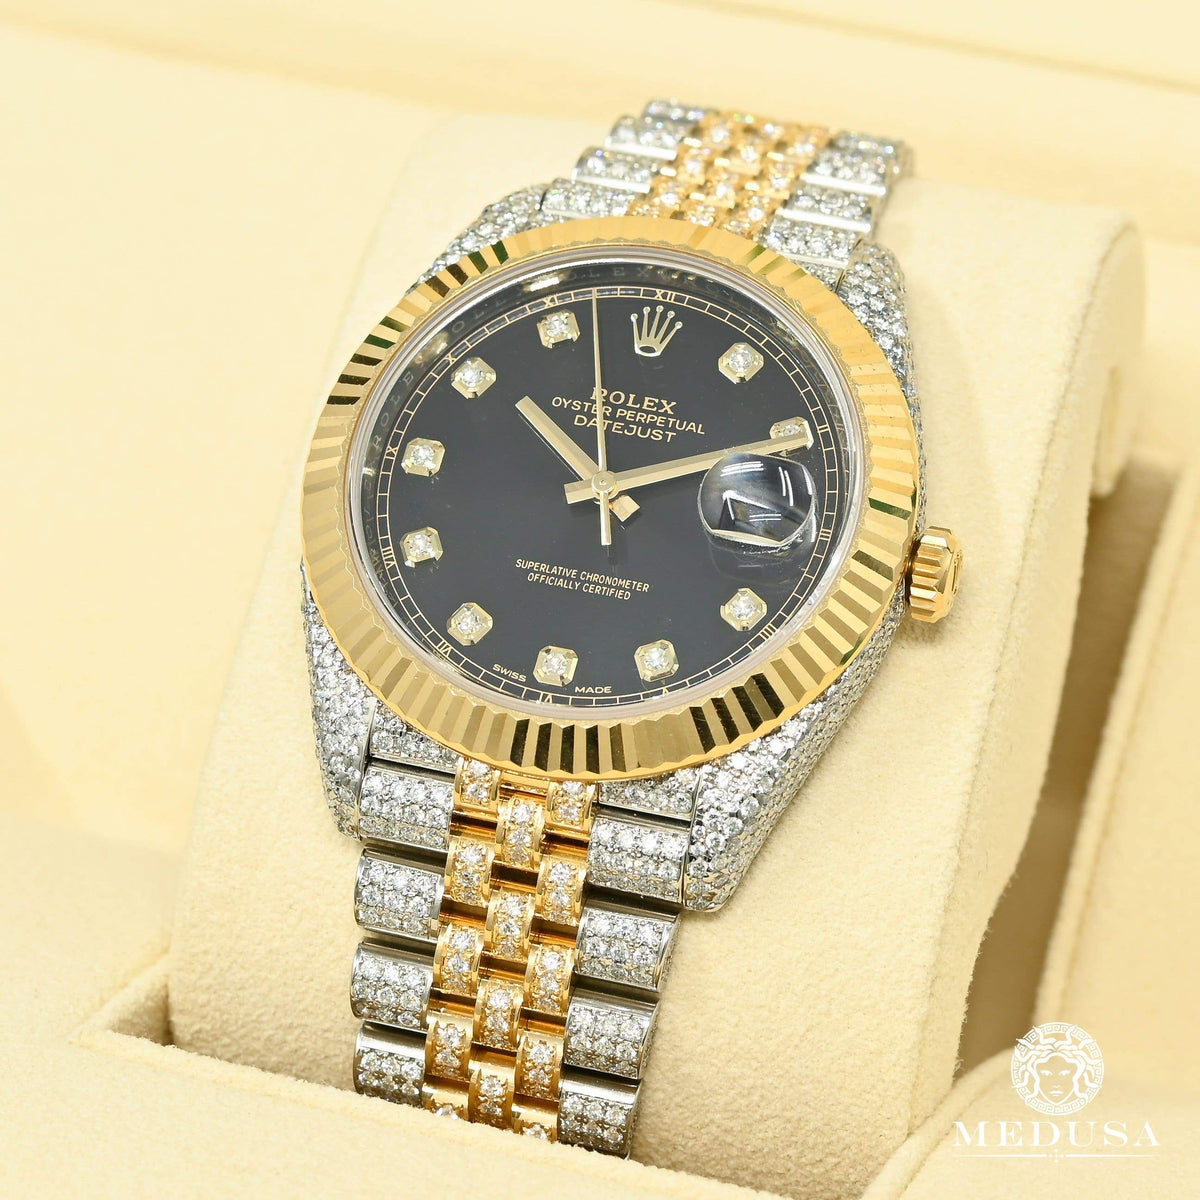 Montre Rolex | Montre Homme Rolex Datejust 41mm - Black Jubilee Fluted Iced Or 2 Tons